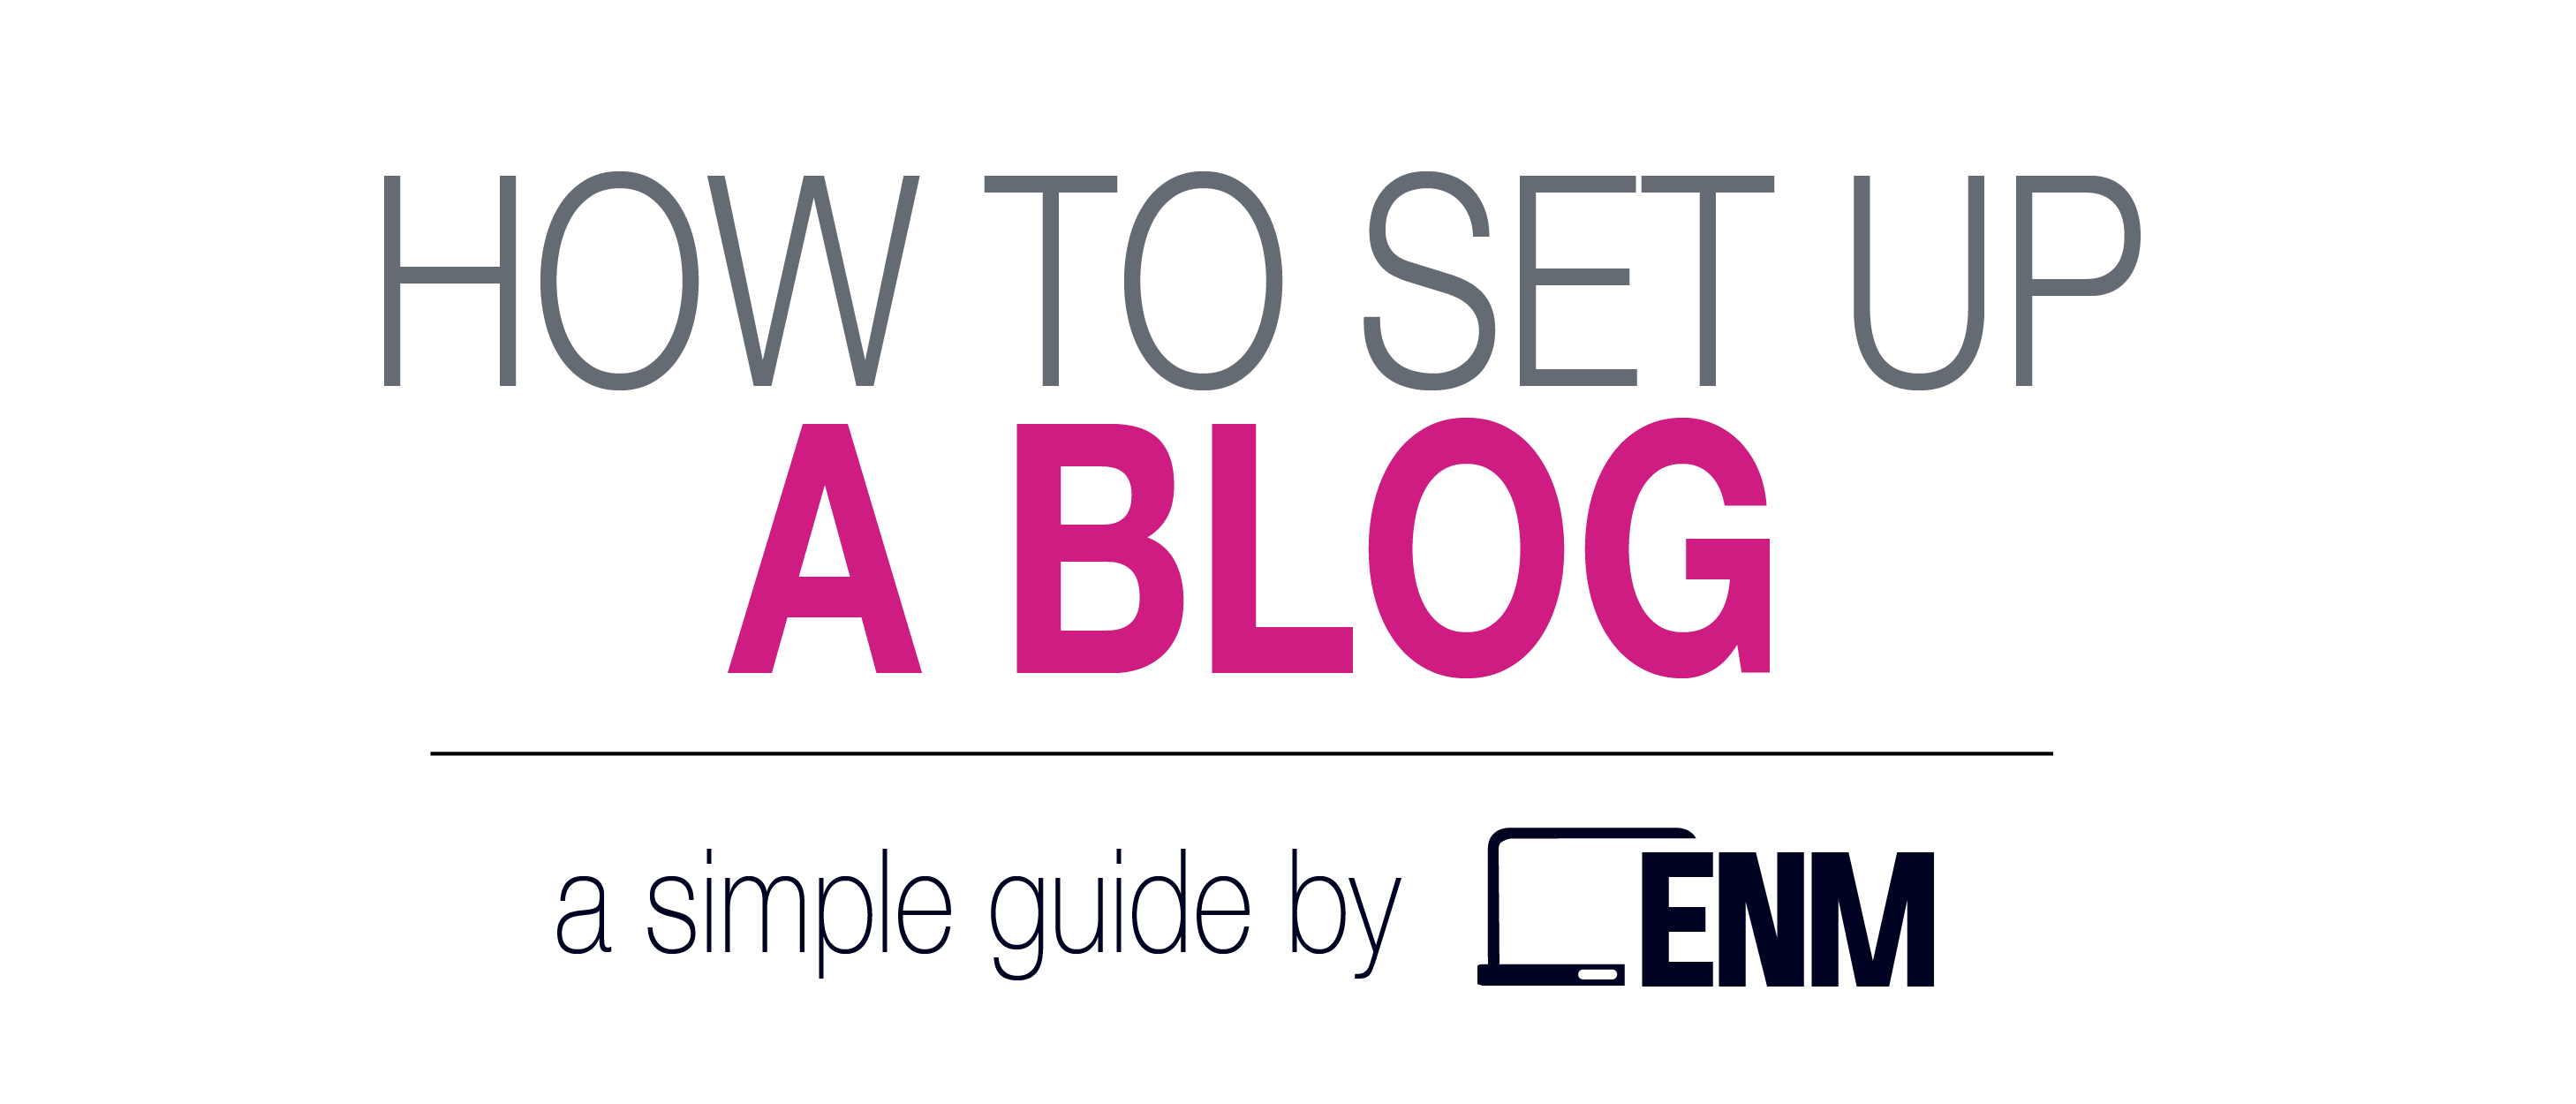 How to set up a blog